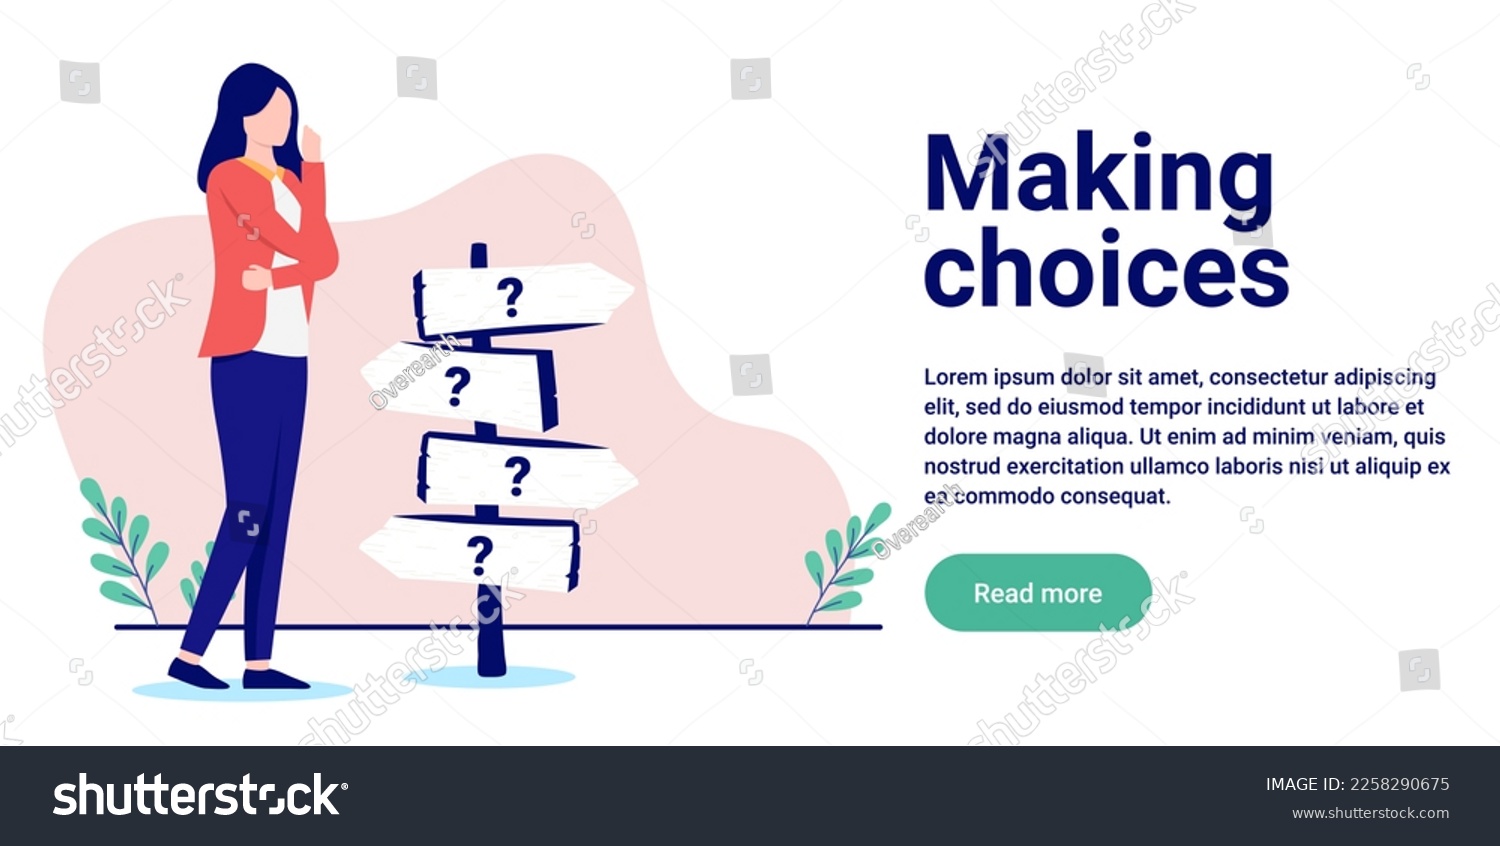 Making choices - Woman trying to make decision in front of crossroad sign. Uncertainty and doubt concept, in flat design vector illustration with copy space for text #2258290675